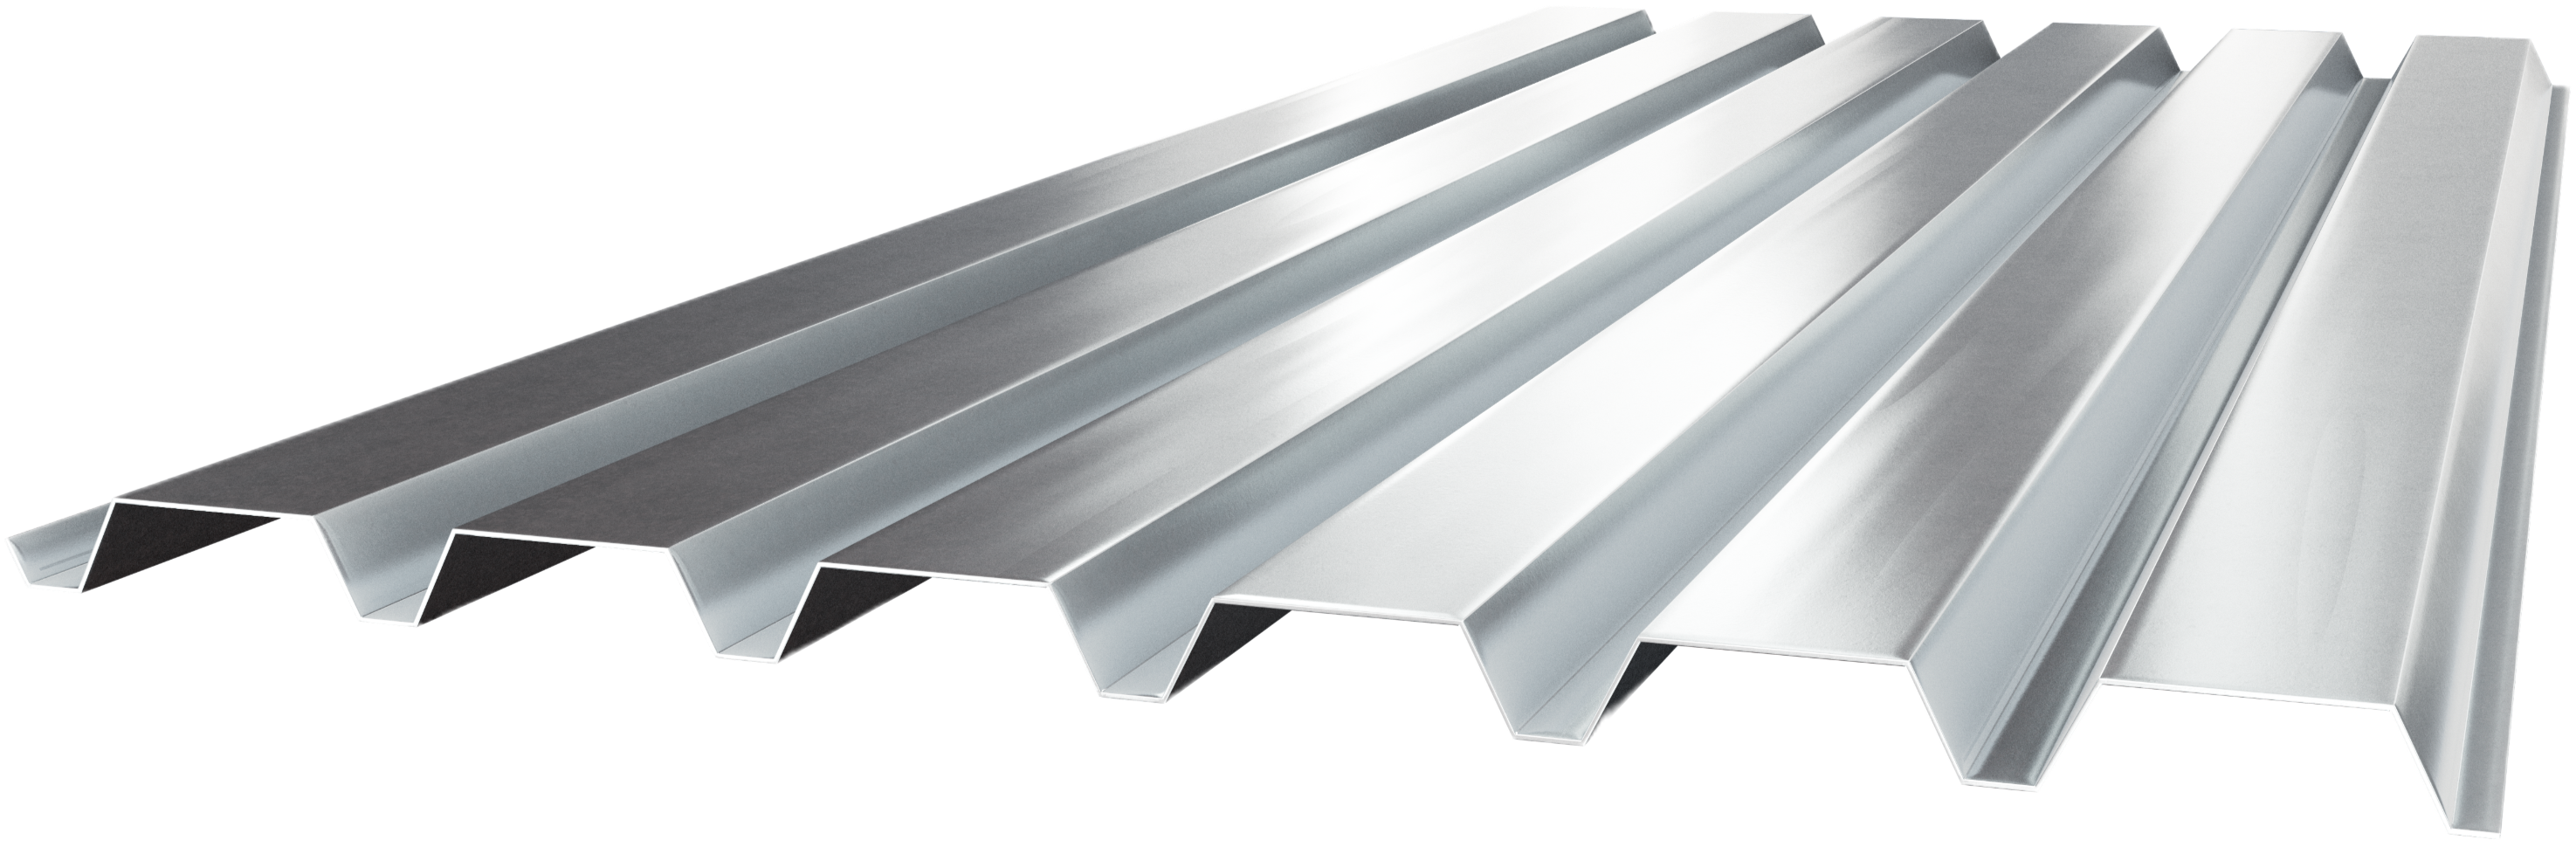 Cordeck Metal Roof Deck Products